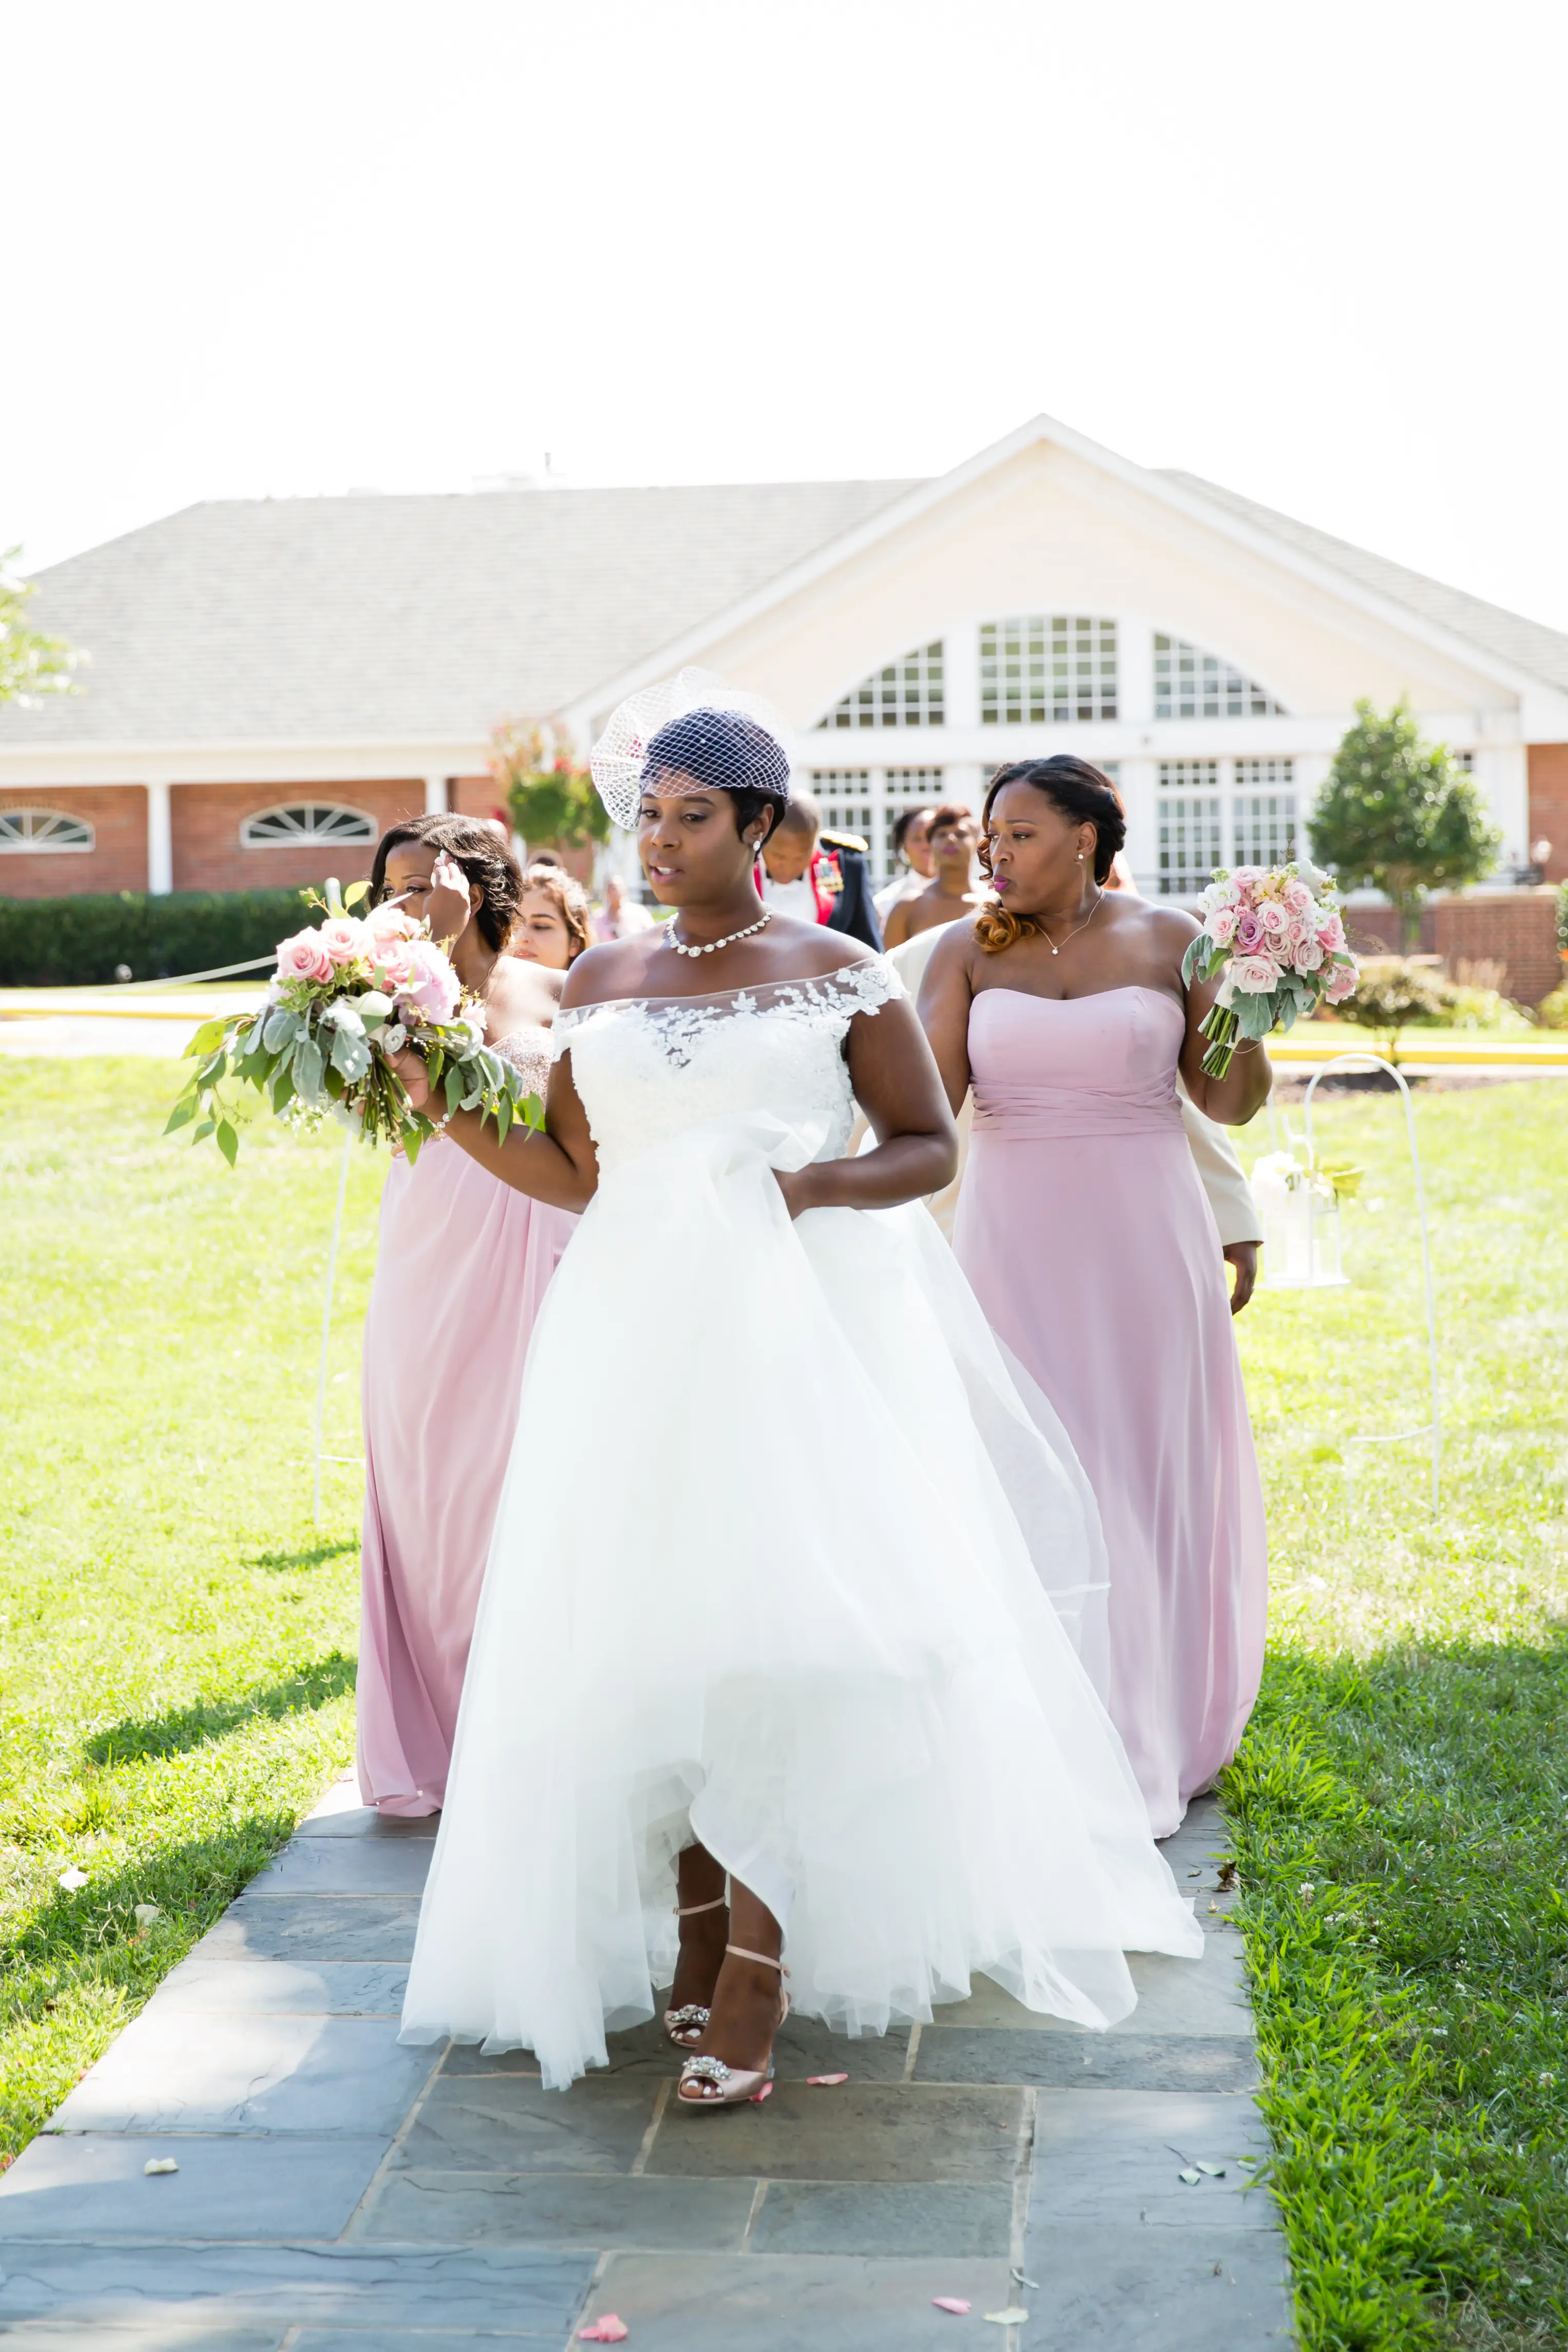 Day of wedding planning services from Monica Browne Weddings.